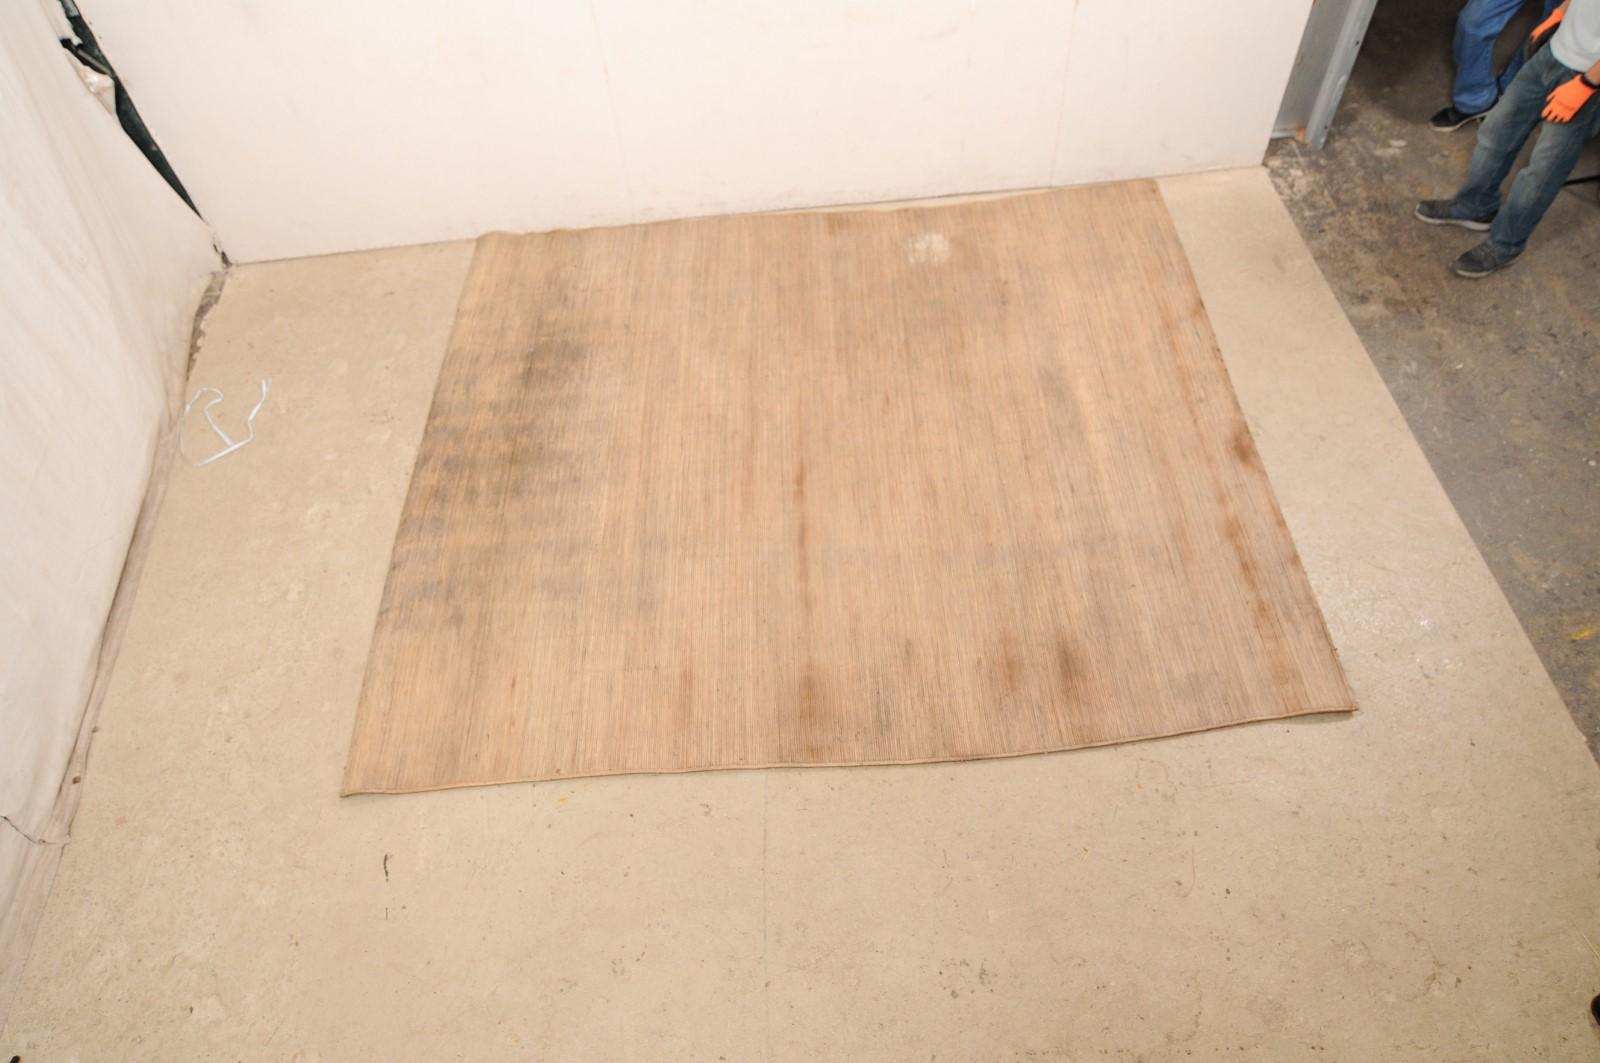 A Malaysian hand-crafted bamboo reed floor mat. This vintage bamboo mat would have originally graced the floors in a Dayak long-house in Borneo; an artisan created piece which is signed by its maker. This nicely sized mat is just shy of 10 feet in